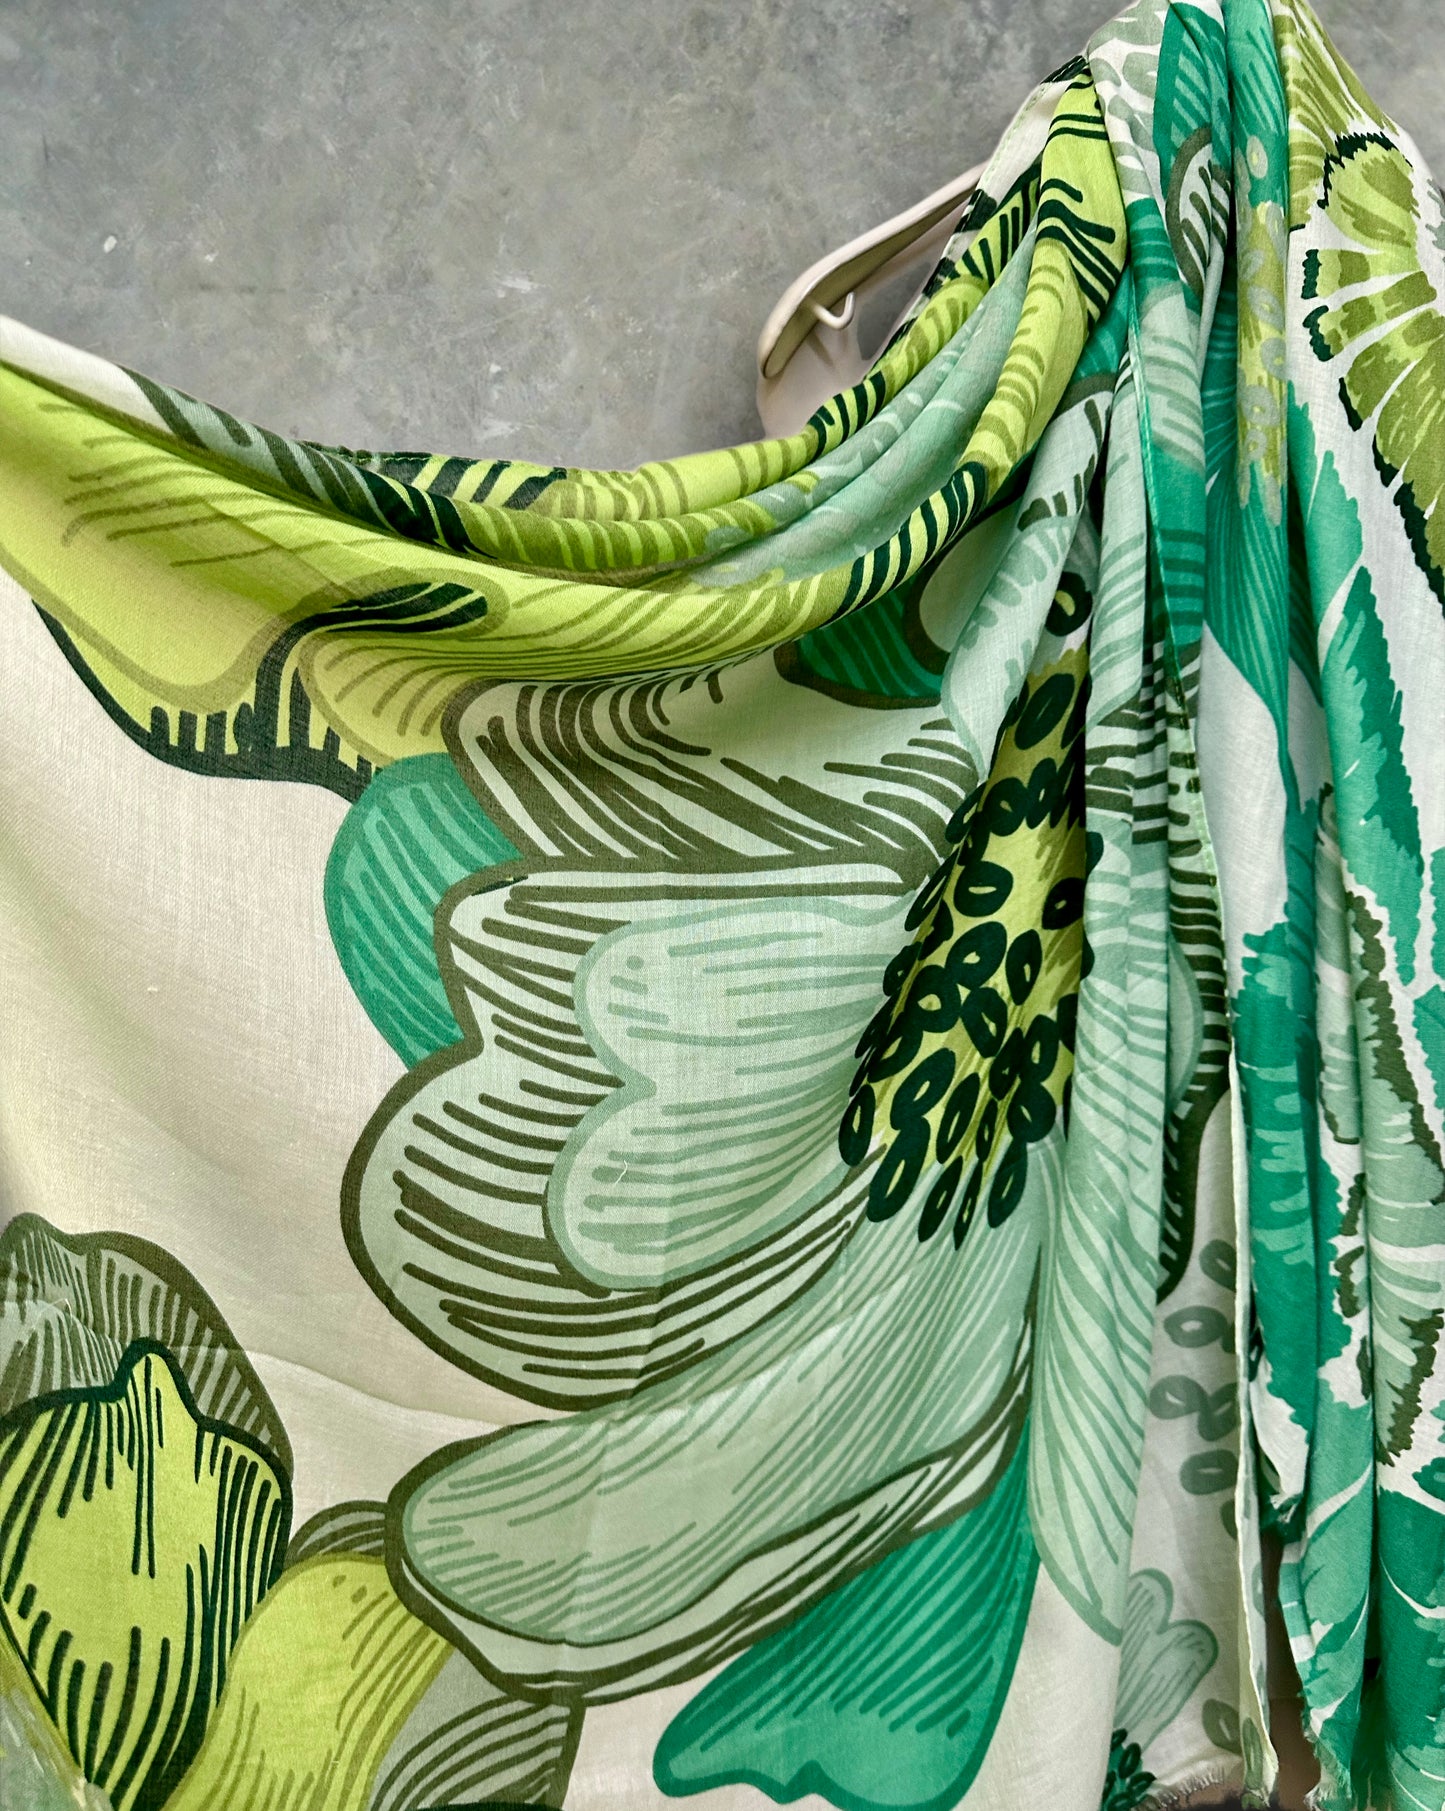 Stunning Green Scarf Featuring Huge Sketched Flowers for Women,Great for All Seasons,Perfect Gifts for Her,Mother,Birthday and Christmas.